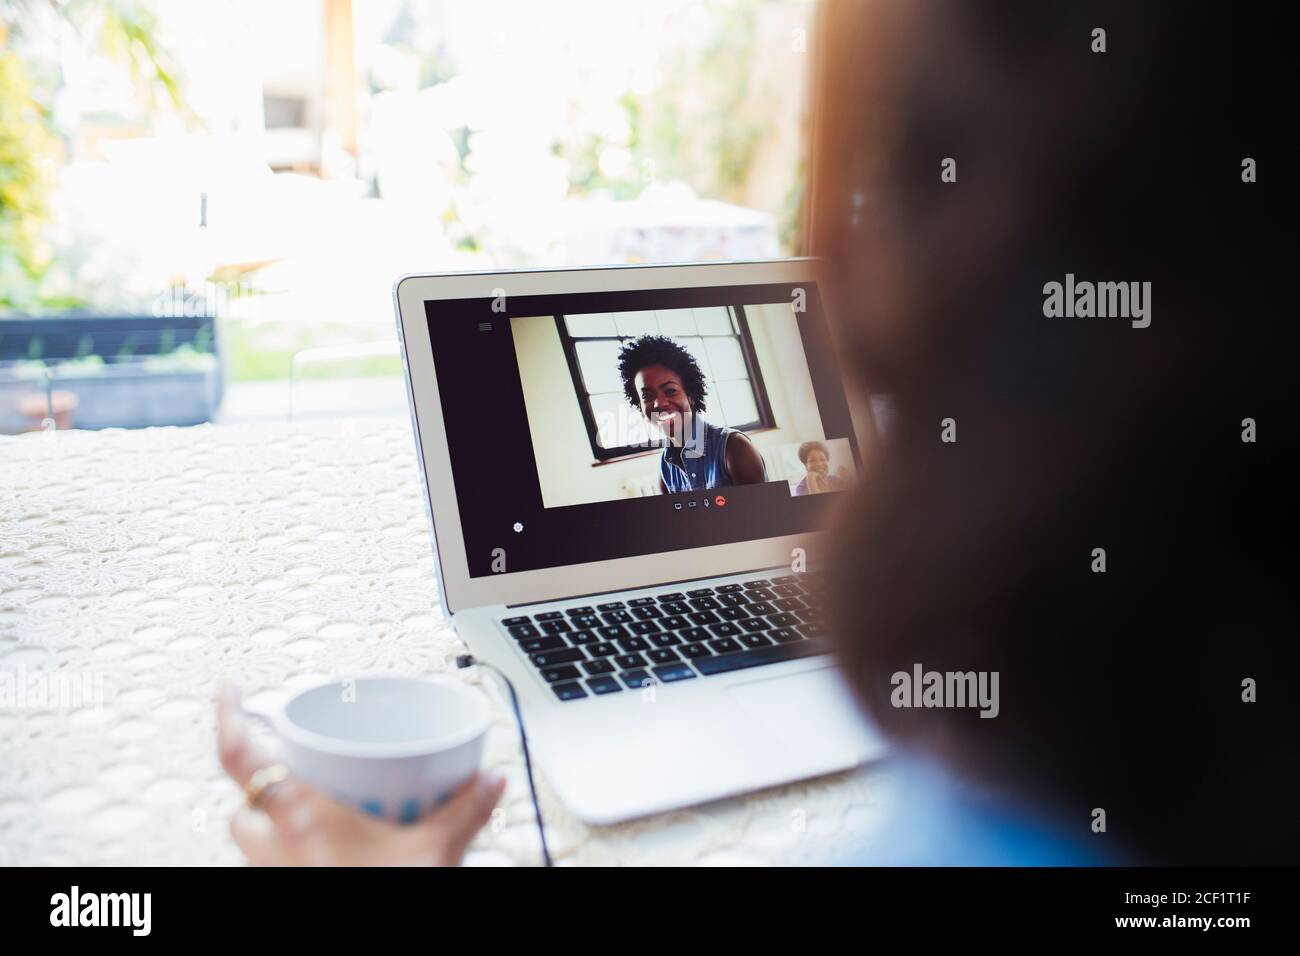 Women video conferencing on laptop screen Stock Photo